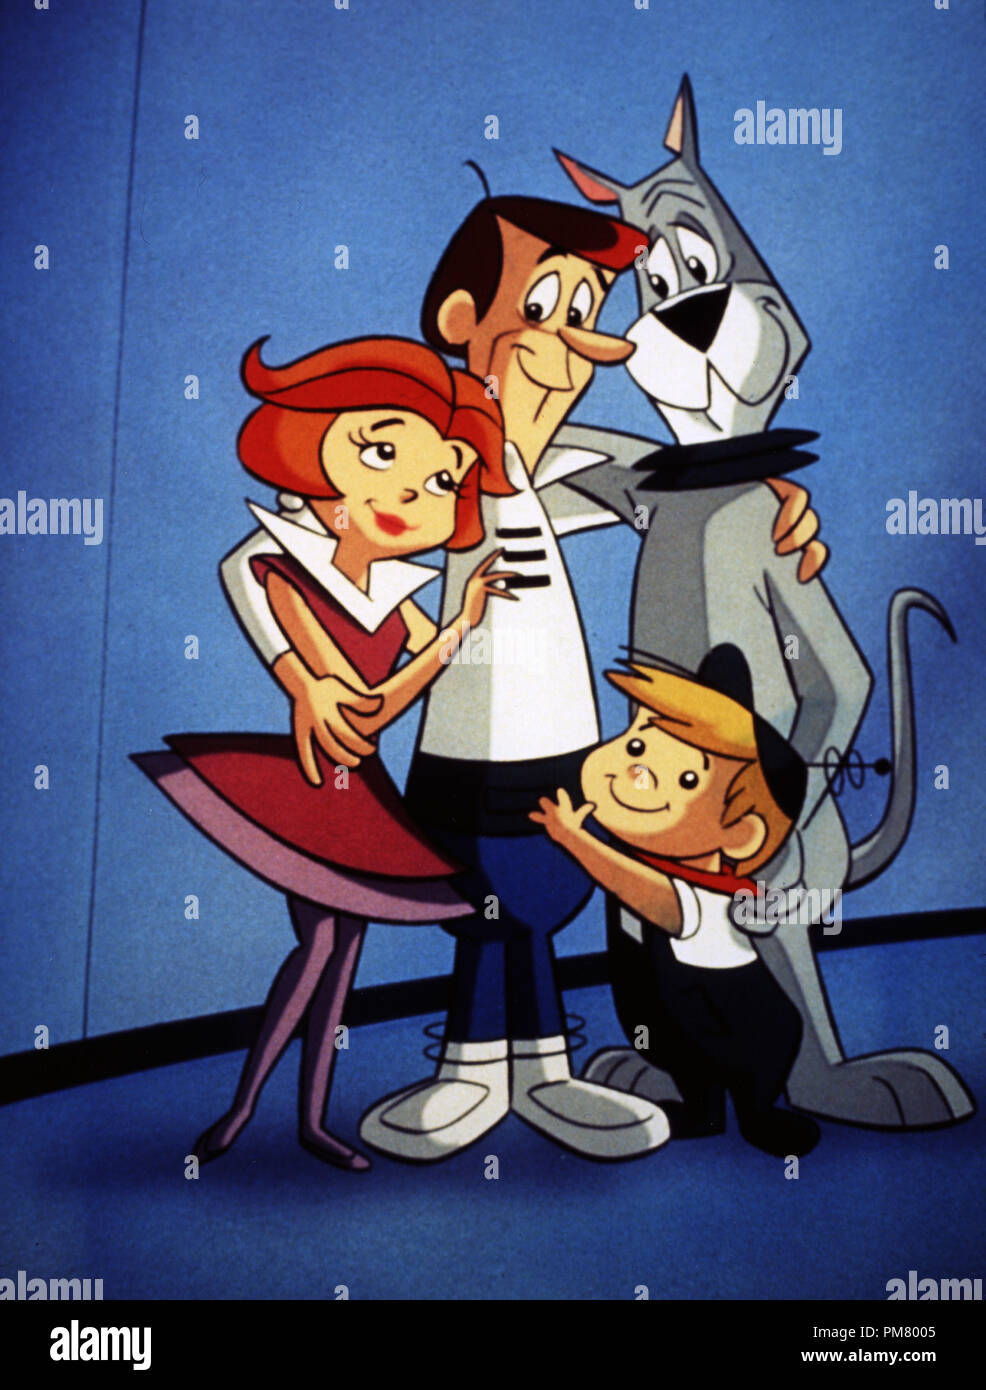 Film still or Publicity still from 'Jetsons: The Movie' Jane, George, Astro and Elroy Jetson © 1990 Universal Pictures  All Rights Reserved   File Reference # 31571199THA  For Editorial Use Only Stock Photo